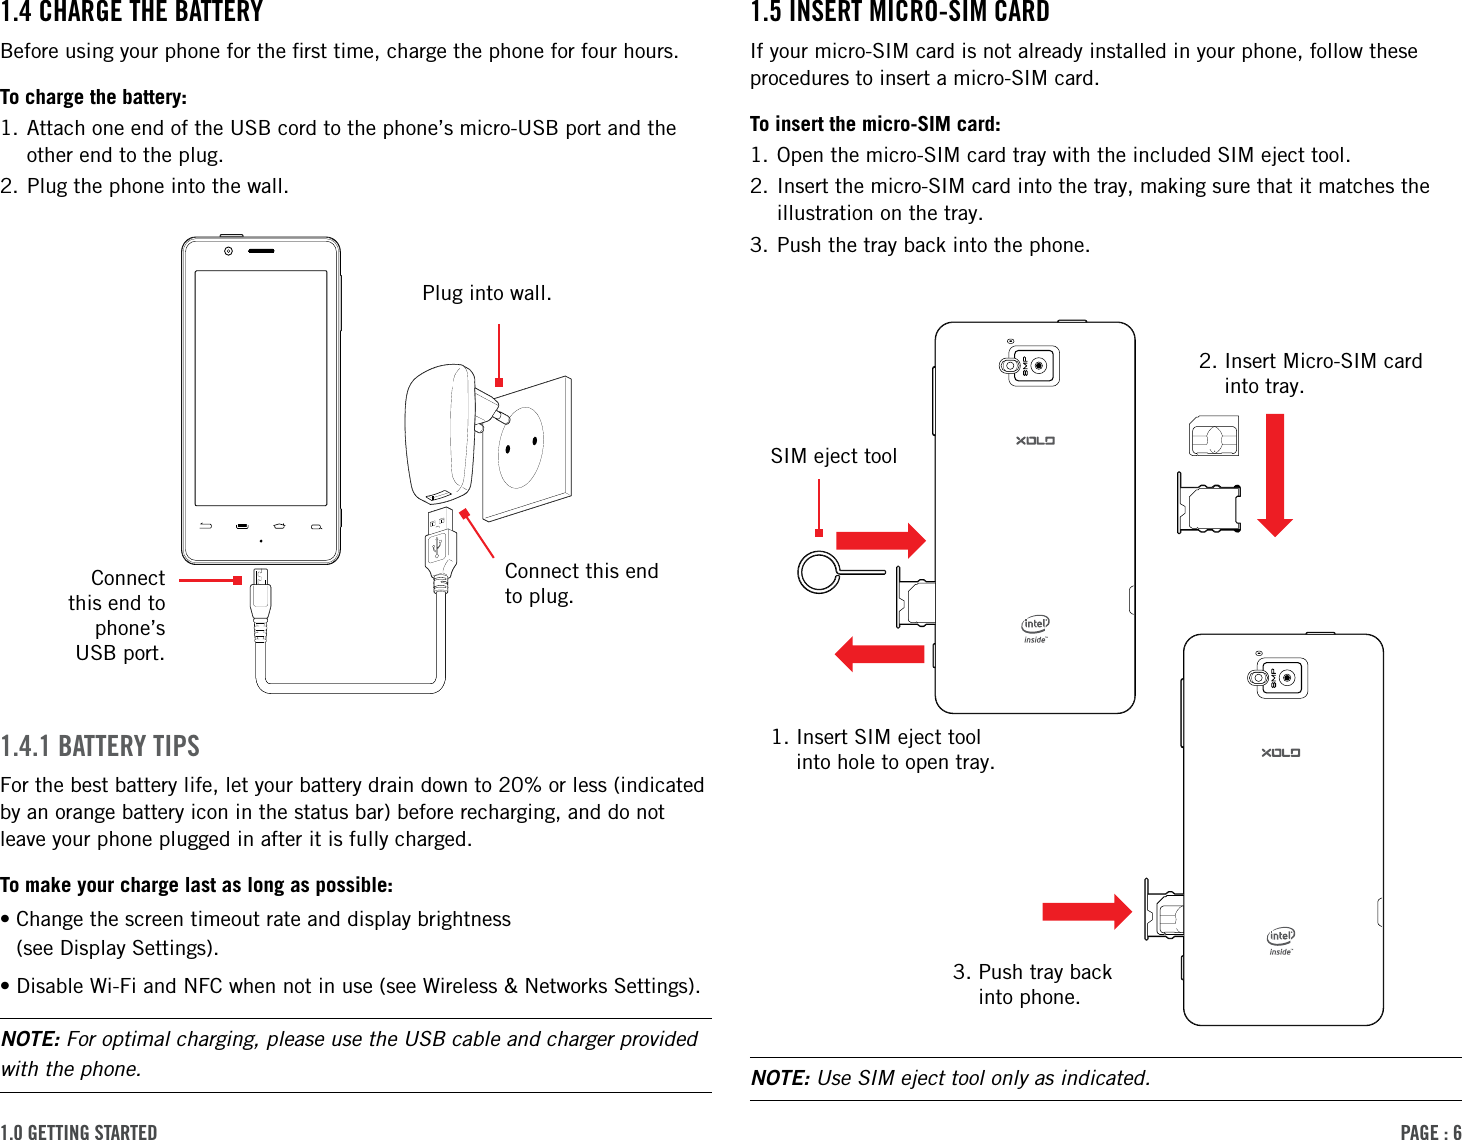 PAge : 61.0 getting started 1.5 insert Micro-siM cArdIf your micro-SIM card is not already installed in your phone, follow these procedures to insert a micro-SIM card.To insert the micro-SIM card:1. Open the micro-SIM card tray with the included SIM eject tool.2.  Insert the micro-SIM card into the tray, making sure that it matches the illustration on the tray.3. Push the tray back into the phone.1.4 chArge the BAtterYBefore using your phone for the ﬁrst time, charge the phone for four hours.To charge the battery:1.  Attach one end of the USB cord to the phone’s micro-USB port and the other end to the plug.2. Plug the phone into the wall.1.4.1 BAtterY tiPsFor the best battery life, let your battery drain down to 20% or less (indicated by an orange battery icon in the status bar) before recharging, and do not leave your phone plugged in after it is fully charged.To make your charge last as long as possible:• Change the screen timeout rate and display brightness  (see Display Settings).•Disable Wi-Fi and NFC when not in use (see Wireless &amp; Networks Settings).NOTE: For optimal charging, please use the USB cable and charger provided with the phone. NOTE: Use SIM eject tool only as indicated.Connect  this end to  phone’s  USB port.Connect this end to plug.Plug into wall.1.  Insert SIM eject tool into hole to open tray.2.  Insert Micro-SIM card into tray.3.  Push tray back  into phone.SIM eject tool